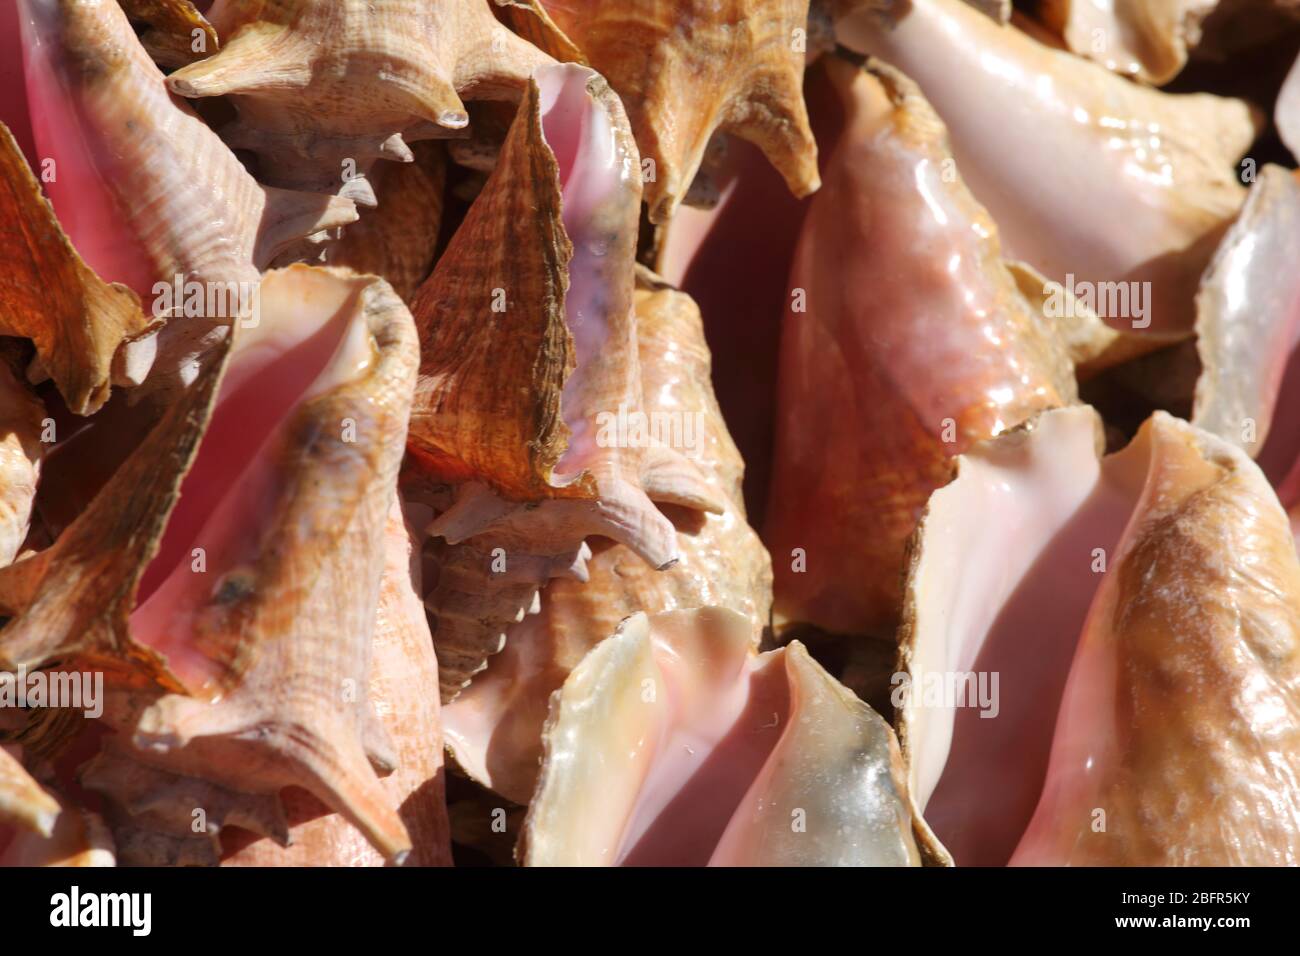 St George's Grenada Conch Shells on sale in Market Stock Photo